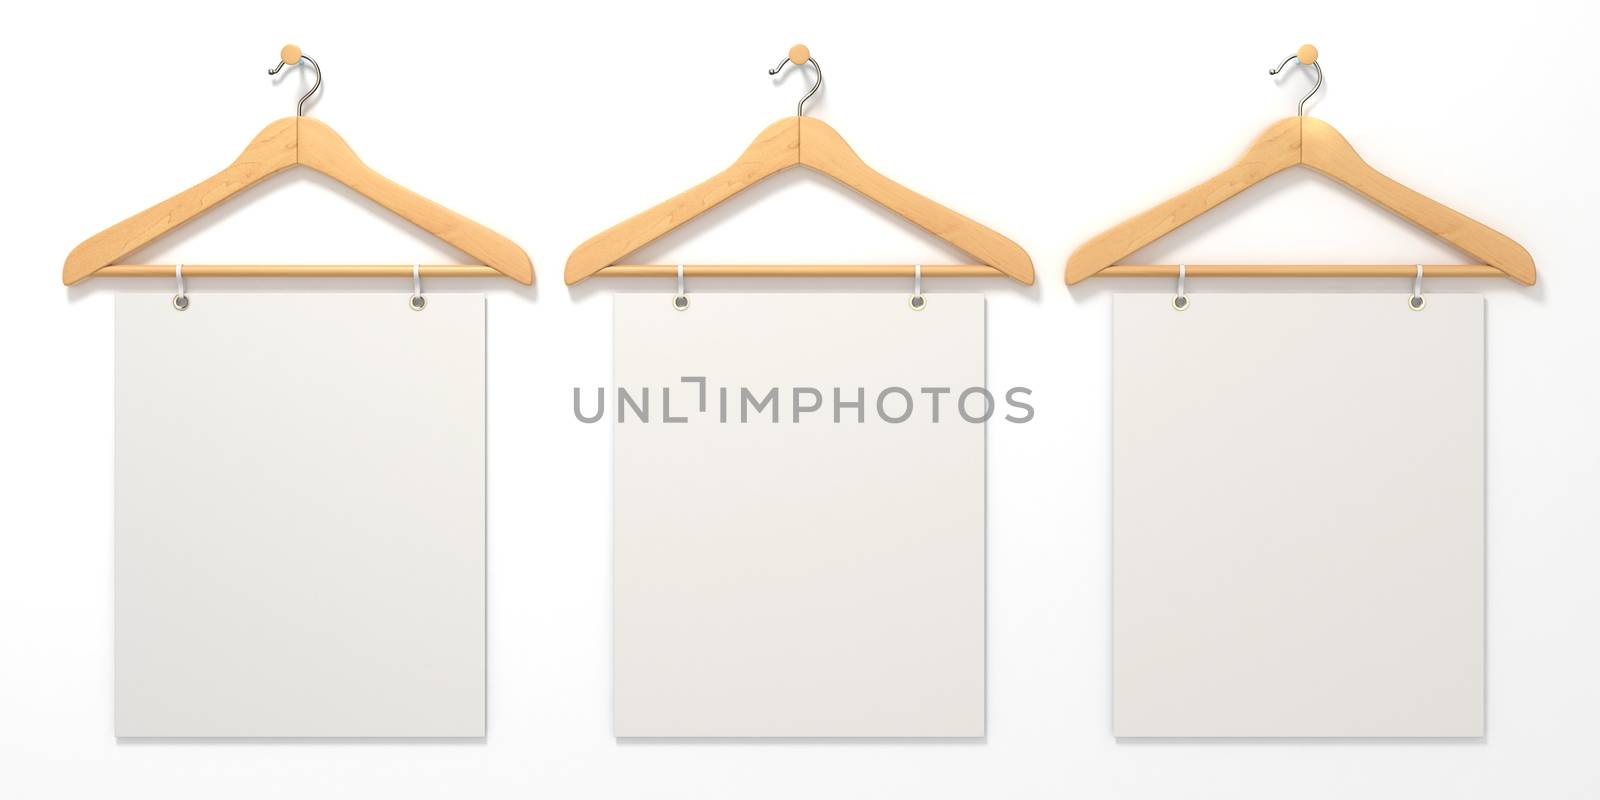 Wooden hangers with blank sign. 3D render illustration isolated on white background